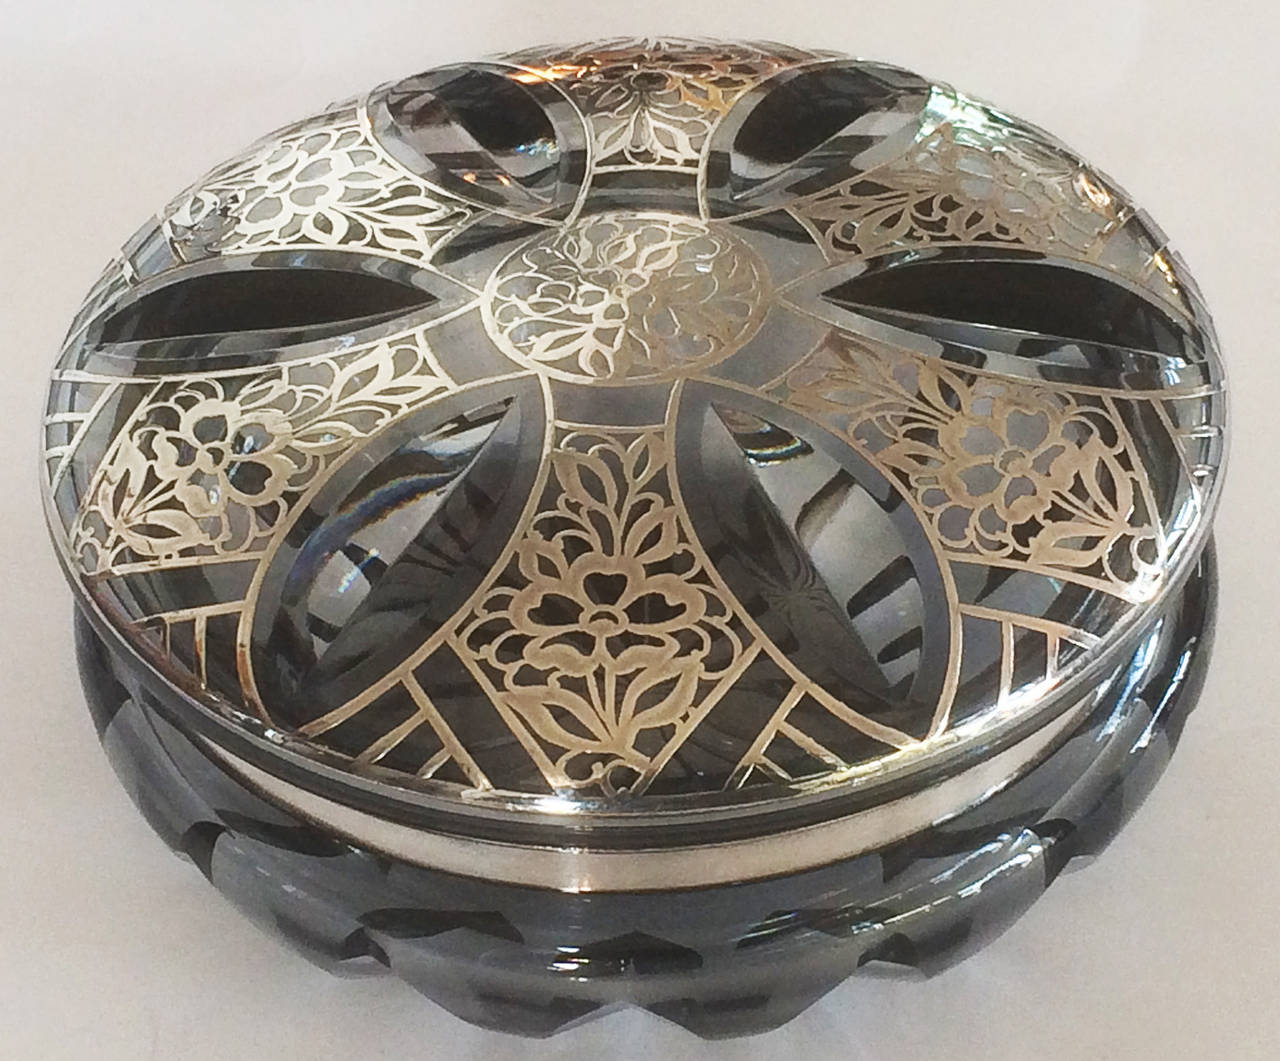 Art Nouveau trinket bowl by Josephinehutte. Heavy silver overlay in flower and leaf pattern, intricate filigree, thick silver. Dimensions approximately: 17 cm diameter x 9 cm high, circa 1920. In absolutely beautiful condition.